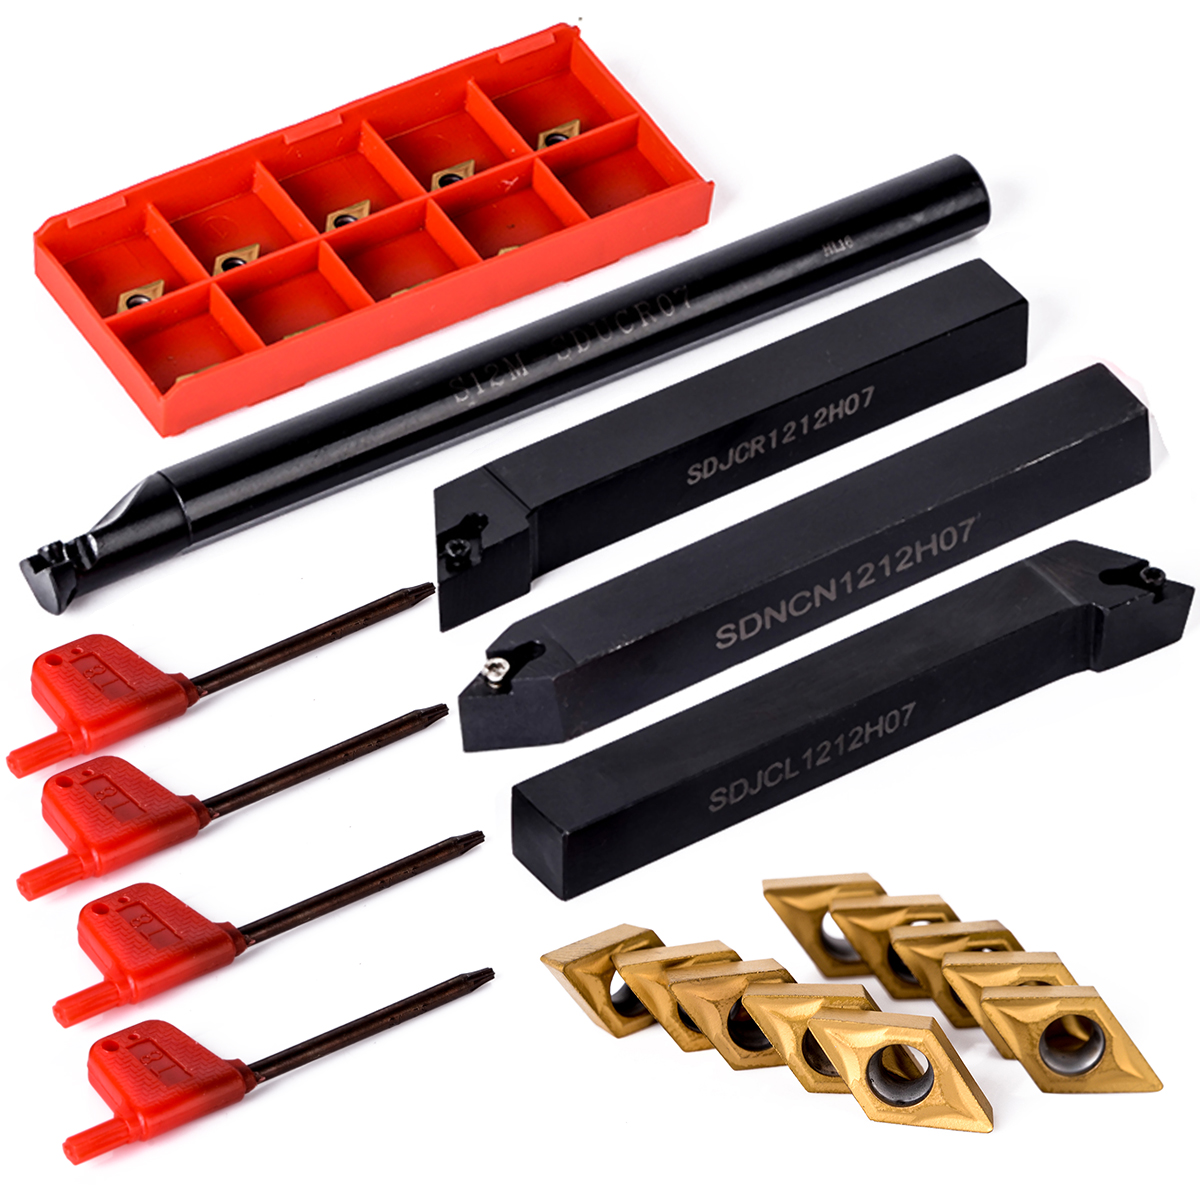 Machifit 10pcs DCMT070204 Carbide Inserts with 4pcs 12mm Lathe Boring Bar Turning Tool Holder and 4p